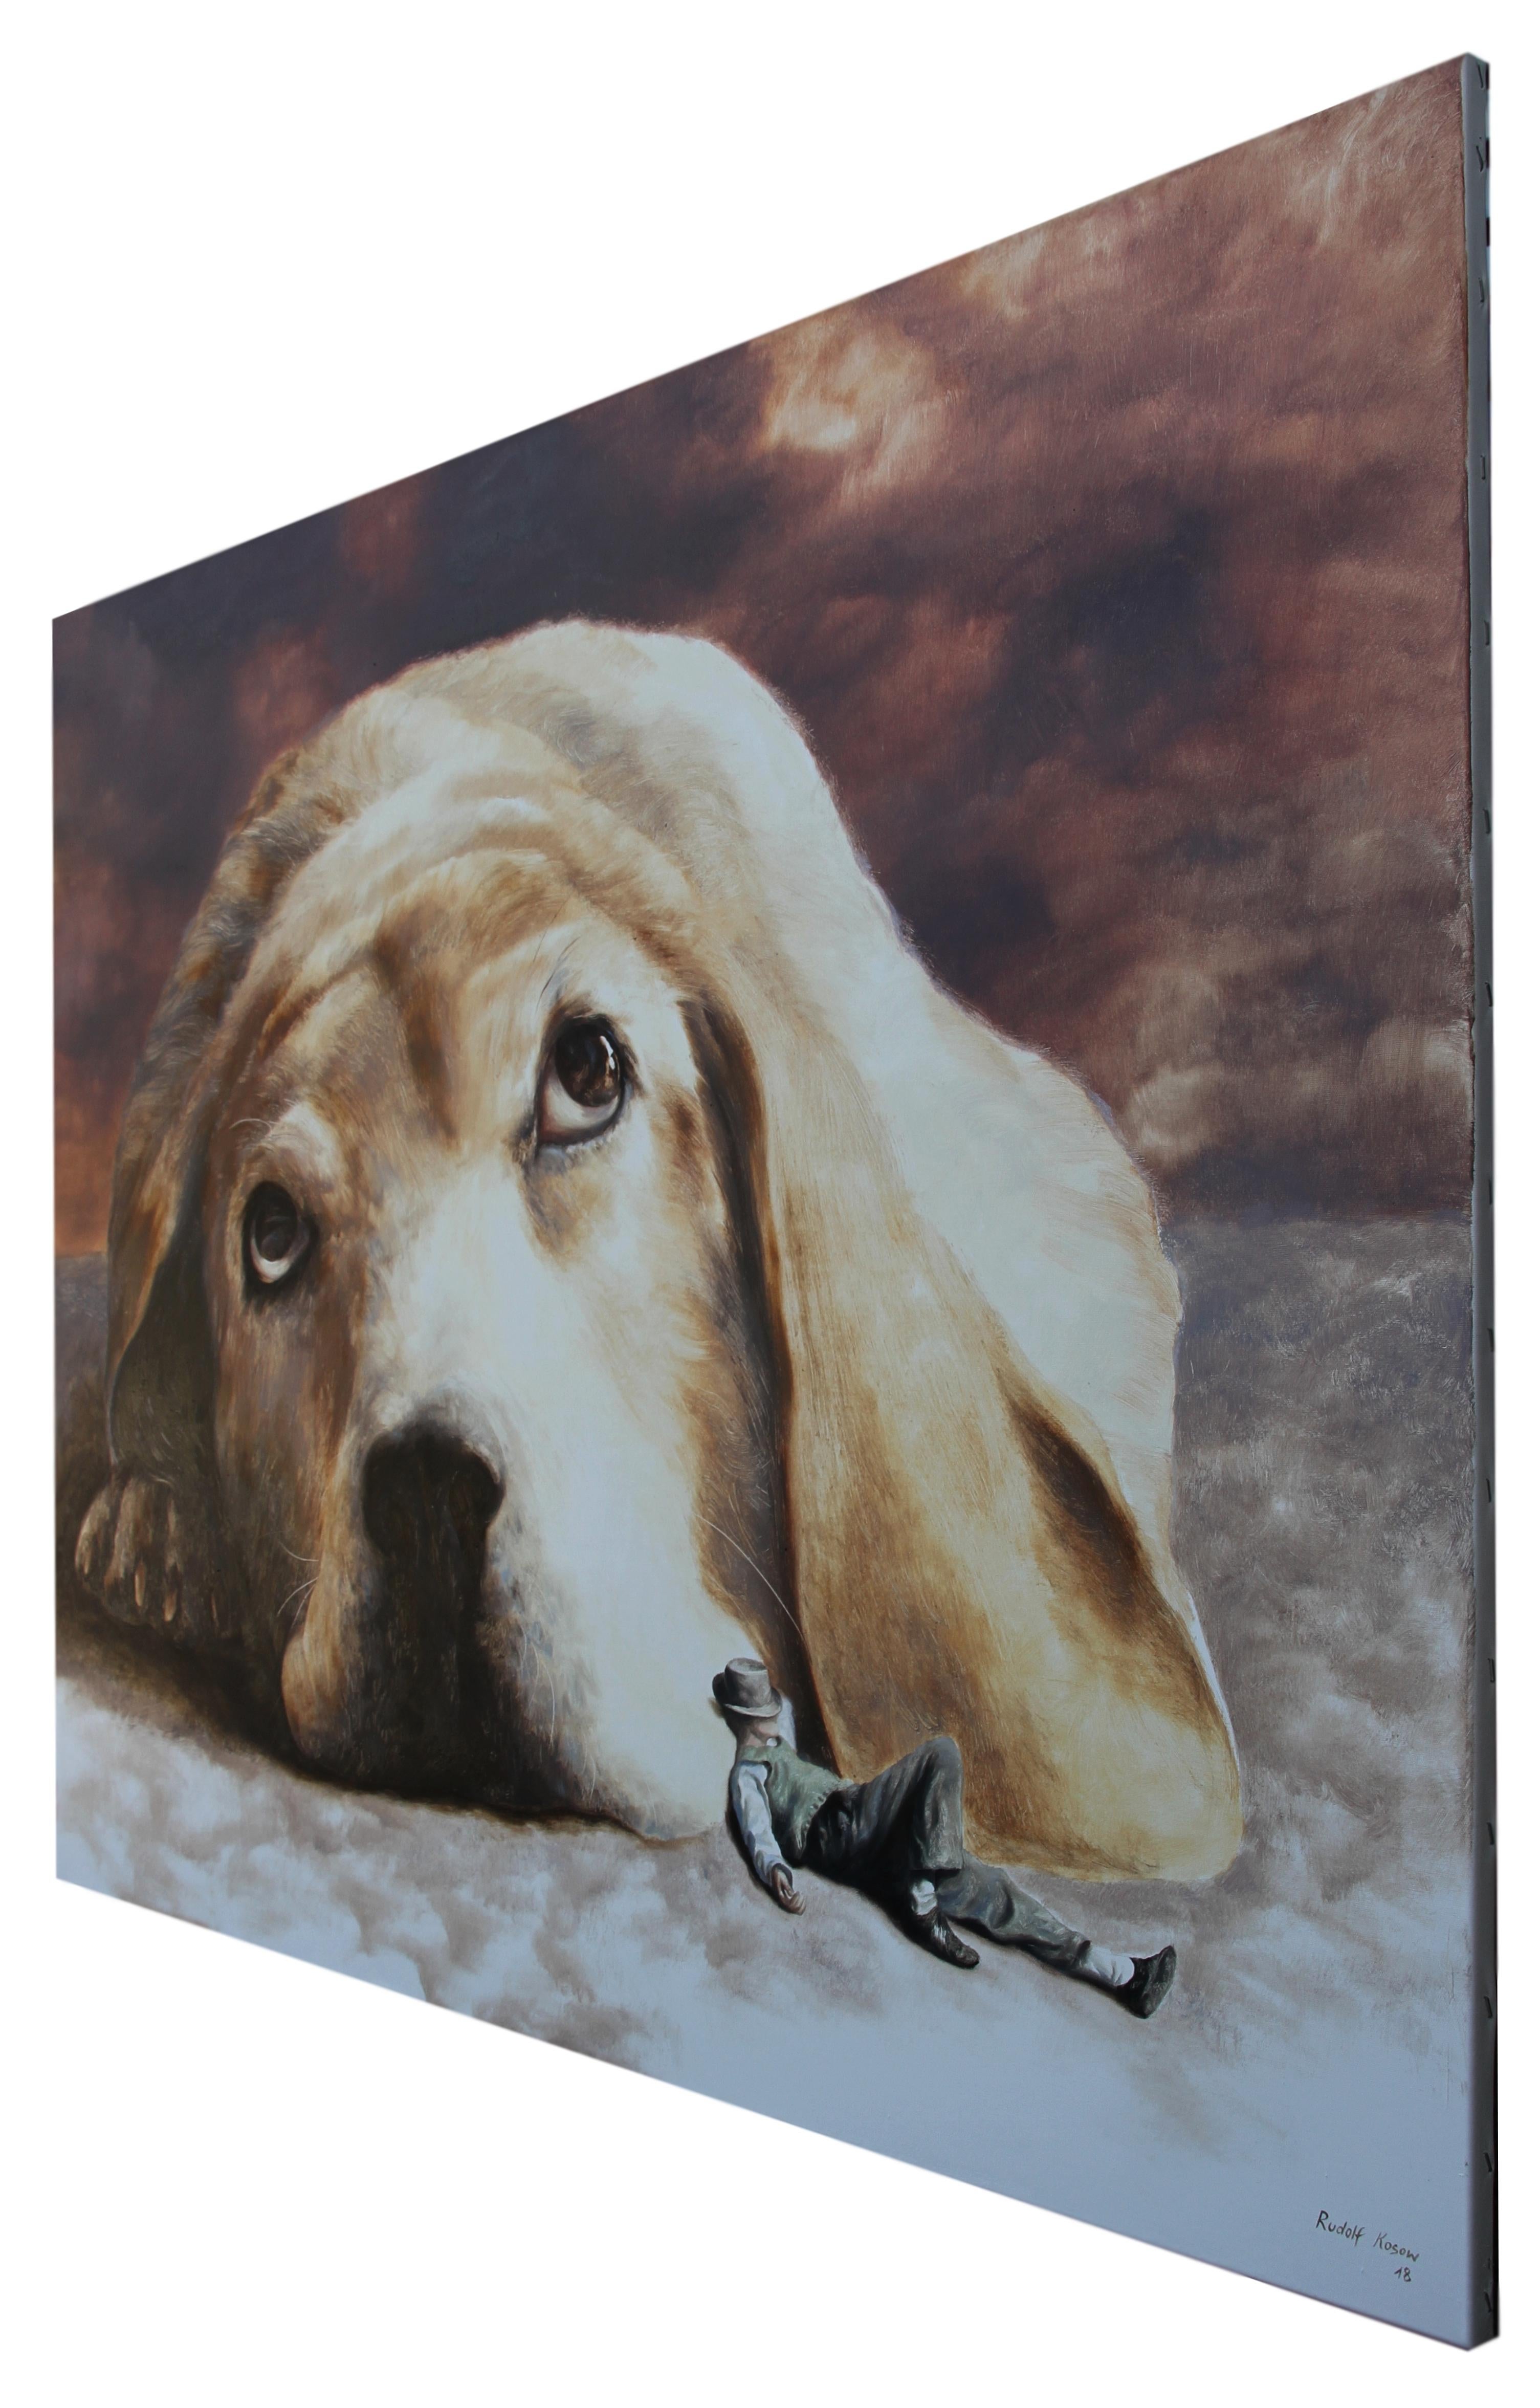 Dog and his friend are on the run, taking a break, taking care of nothing and are happy to
have each other. Despite the impossibility of such a scene in real life, the painter tries to
create a realistic impression by modeling volumes through